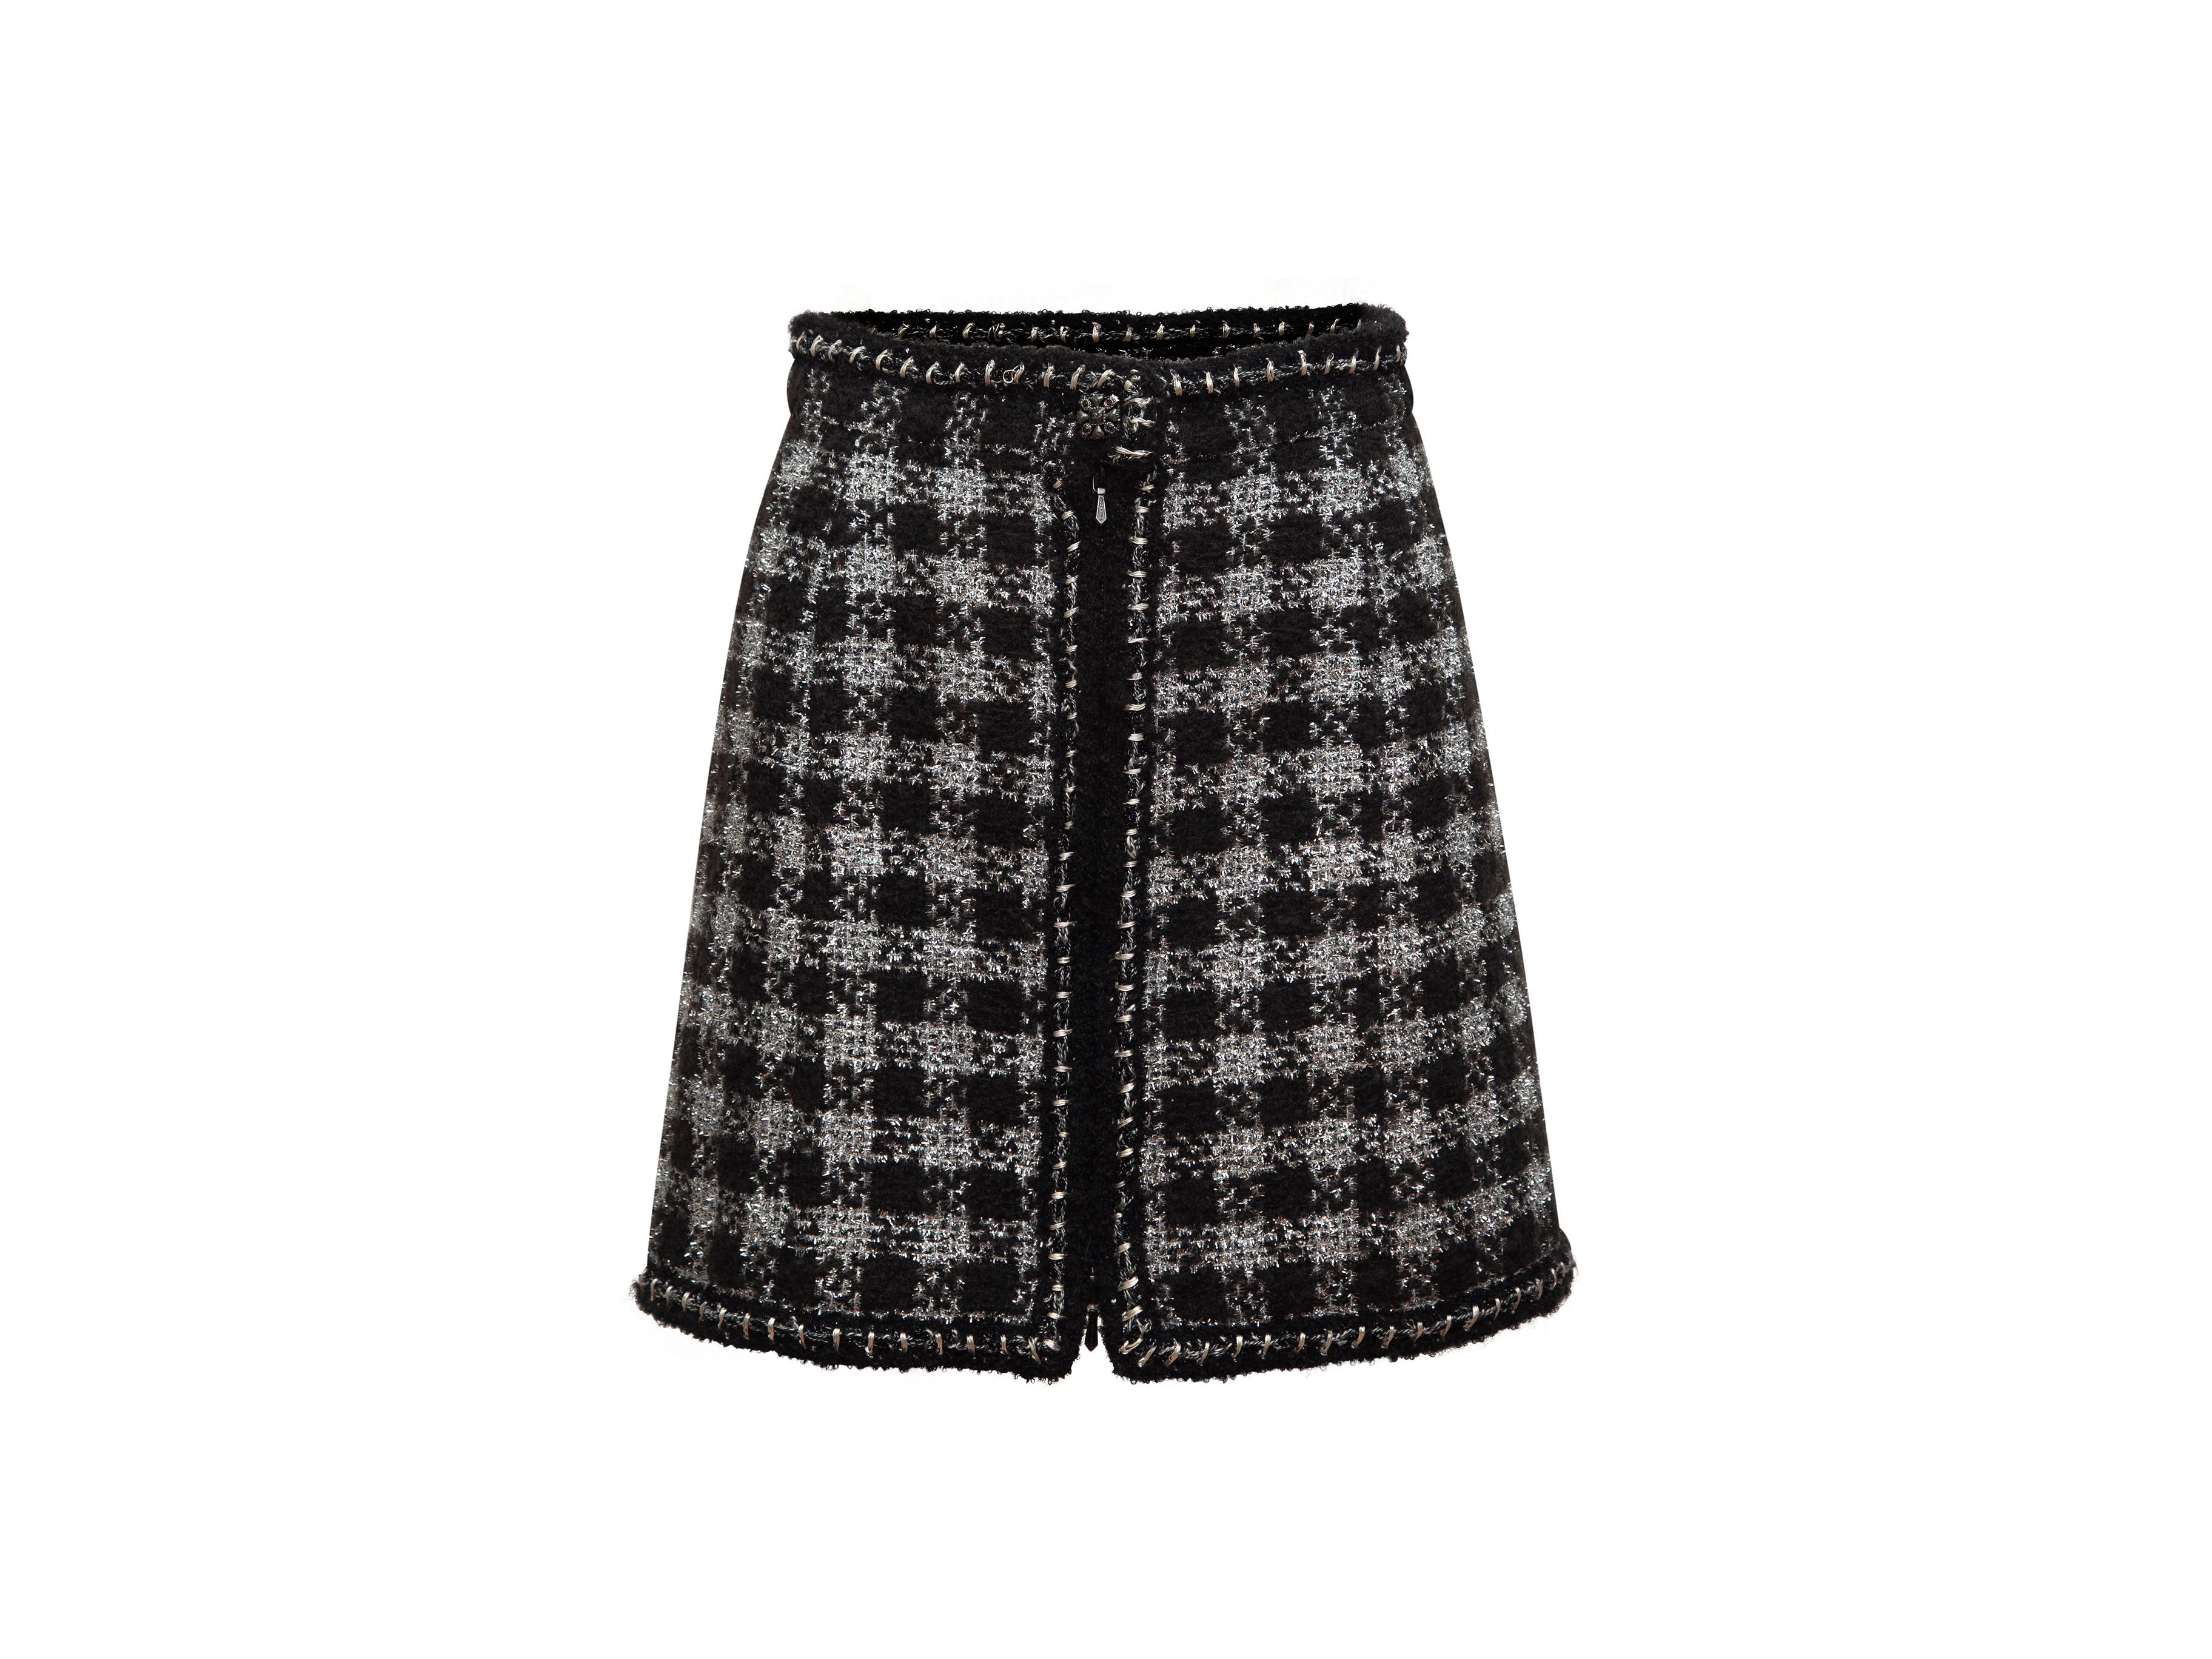 Product details: Black and silver gingham tweed mini skirt by Chanel. Zip and CC button closure at center front. Designer size 38. 26